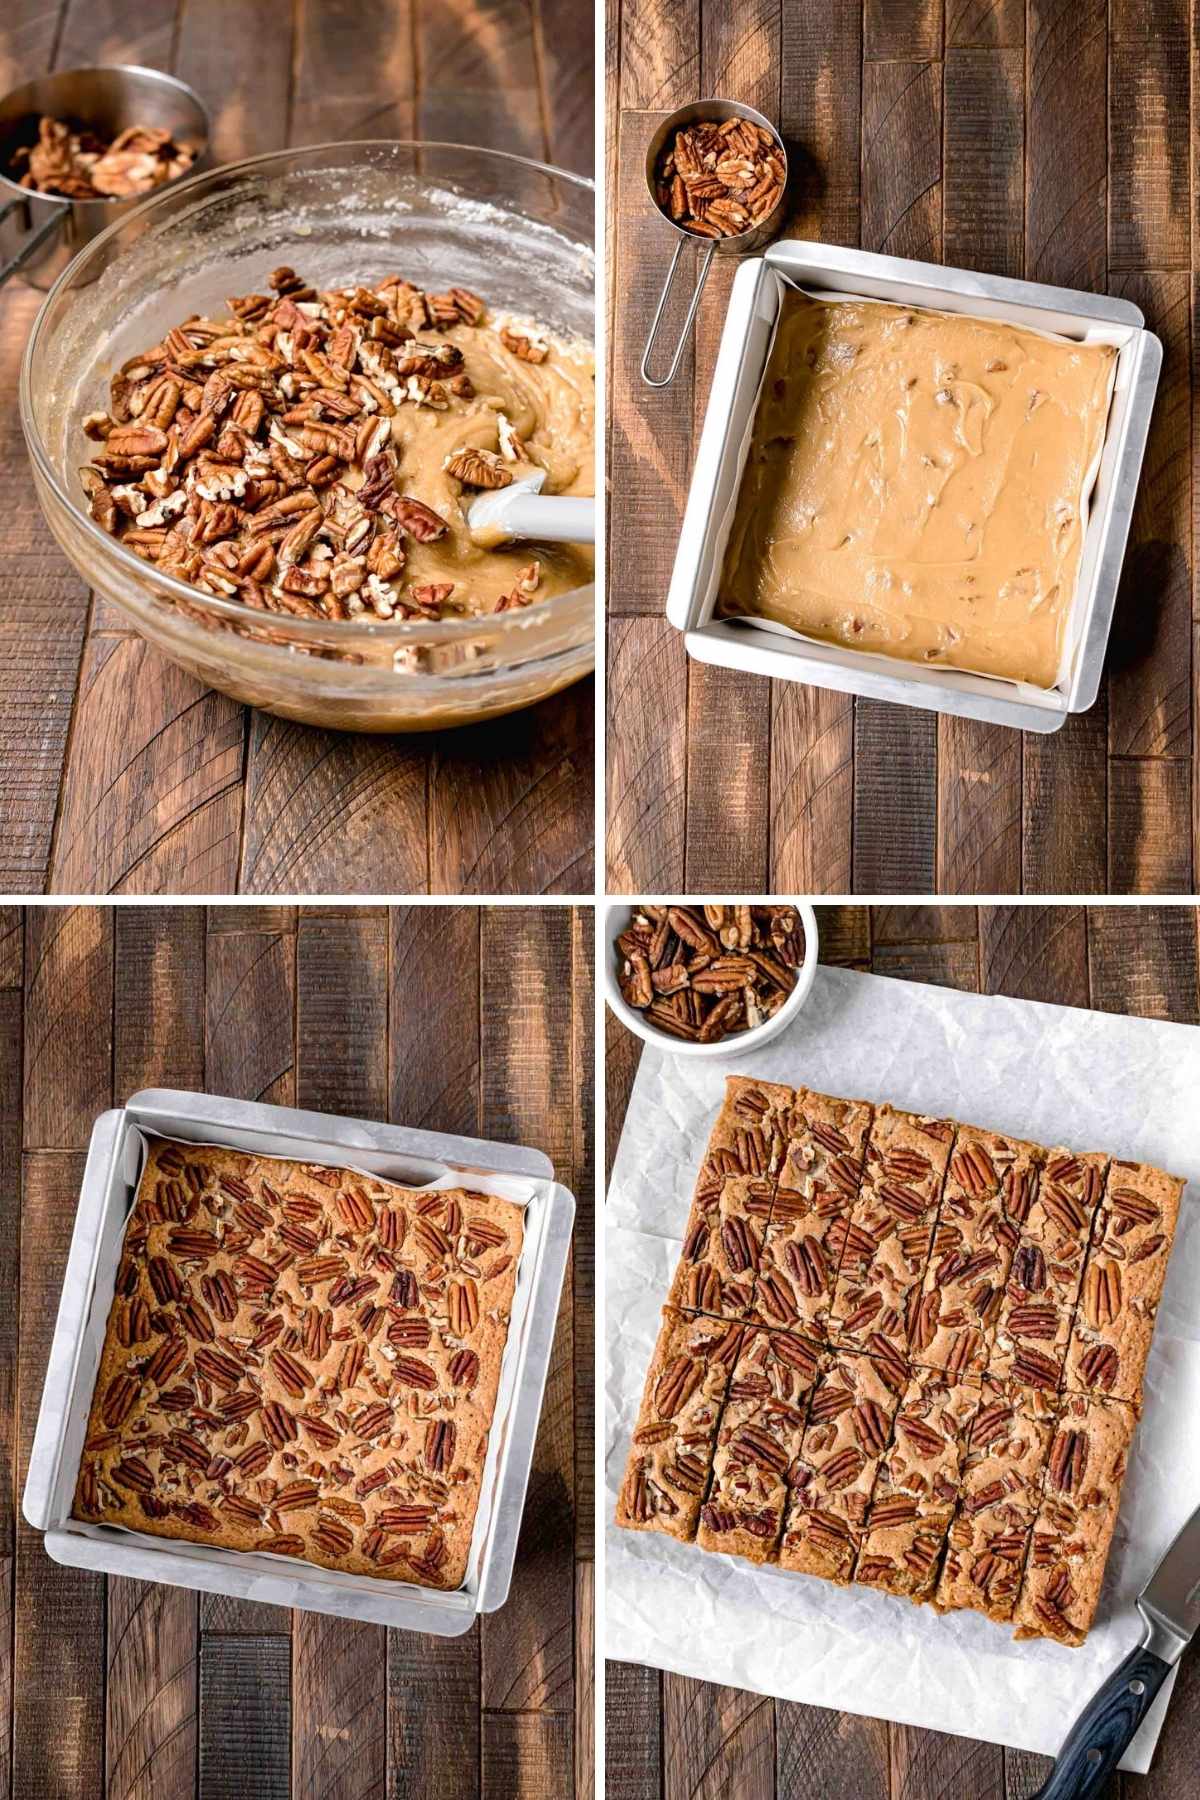 Collage showing steps to make Maple Pecan Bars.